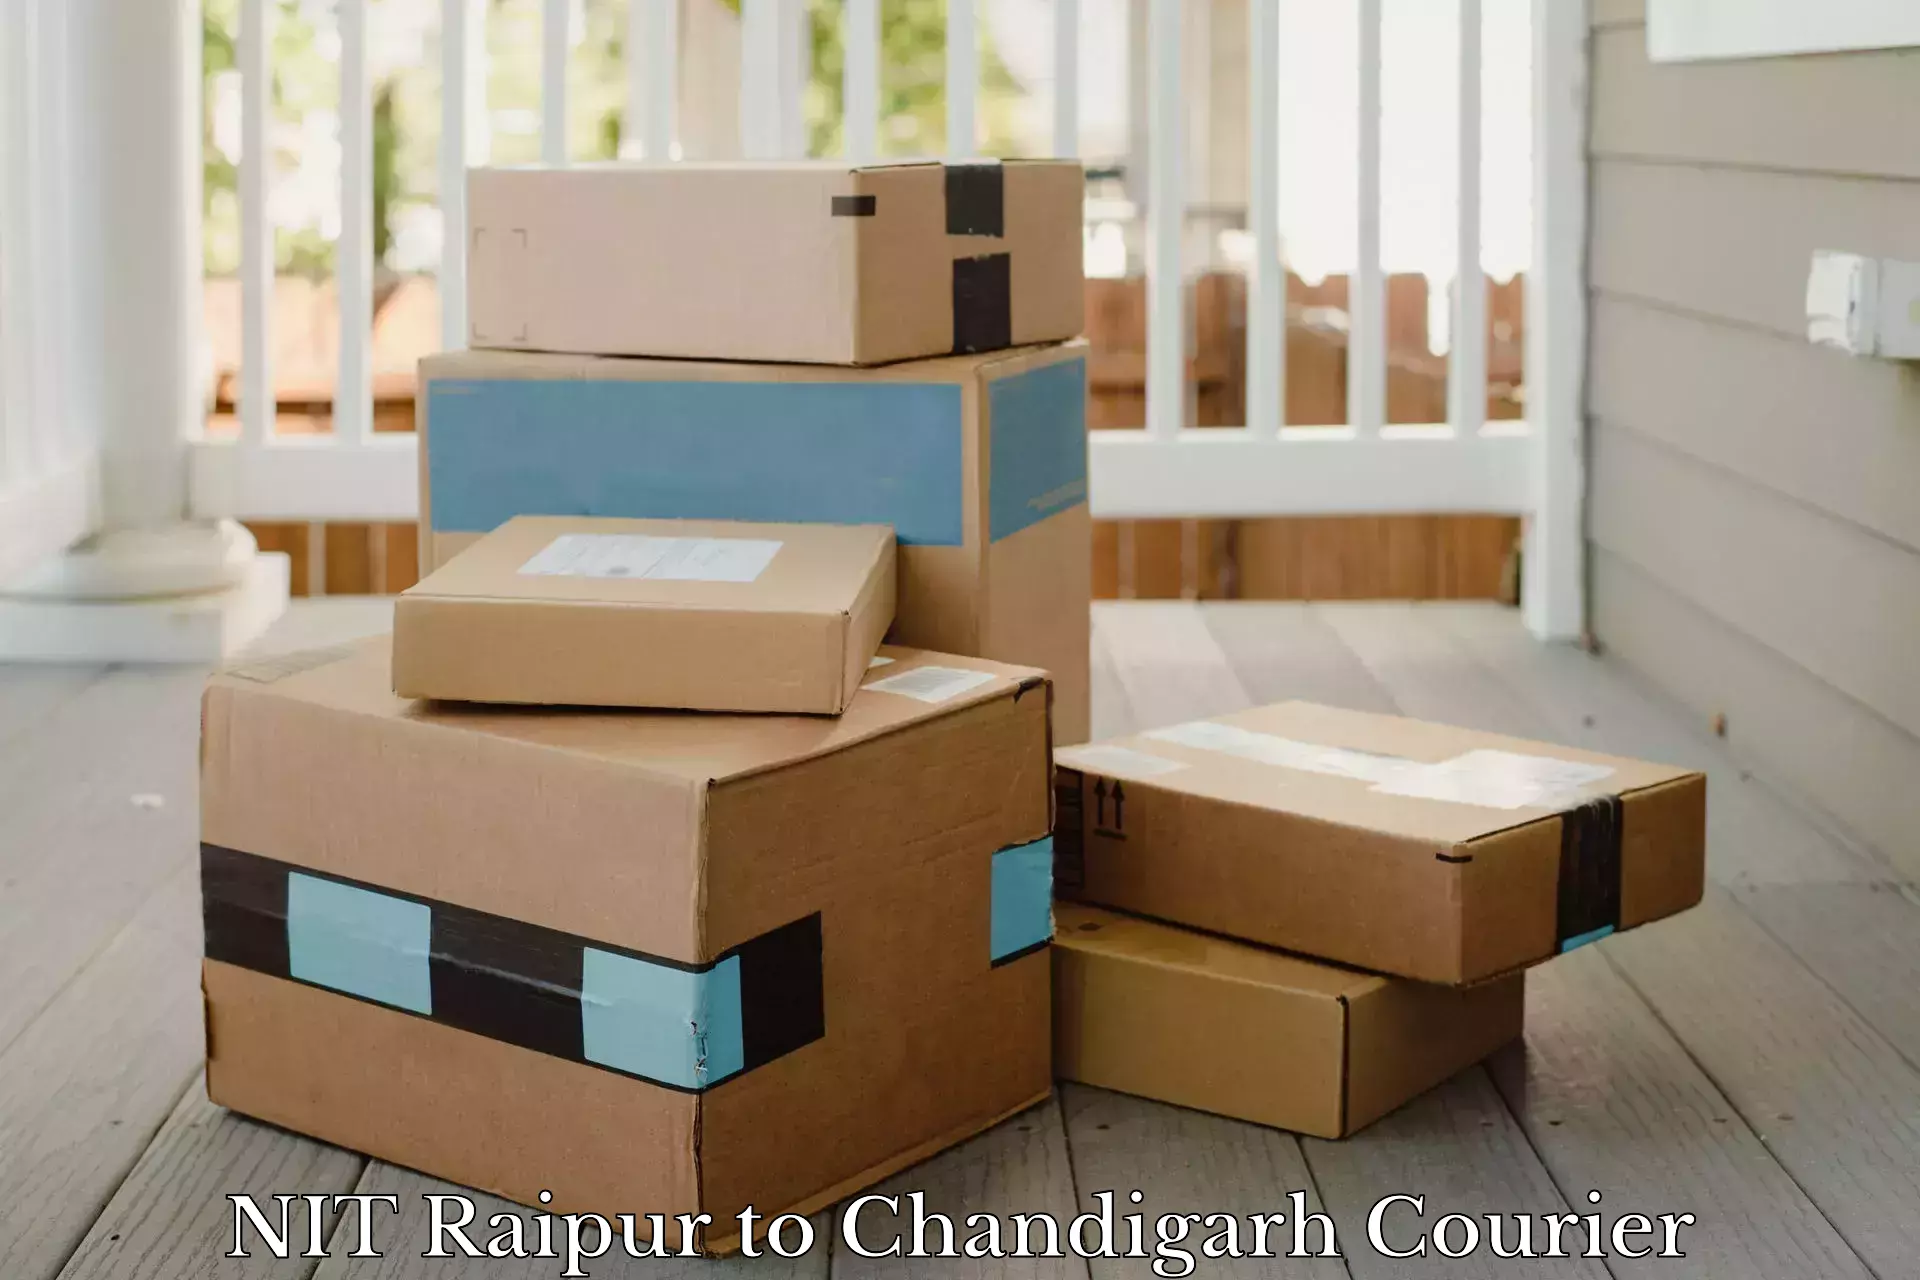 Professional courier handling NIT Raipur to Chandigarh